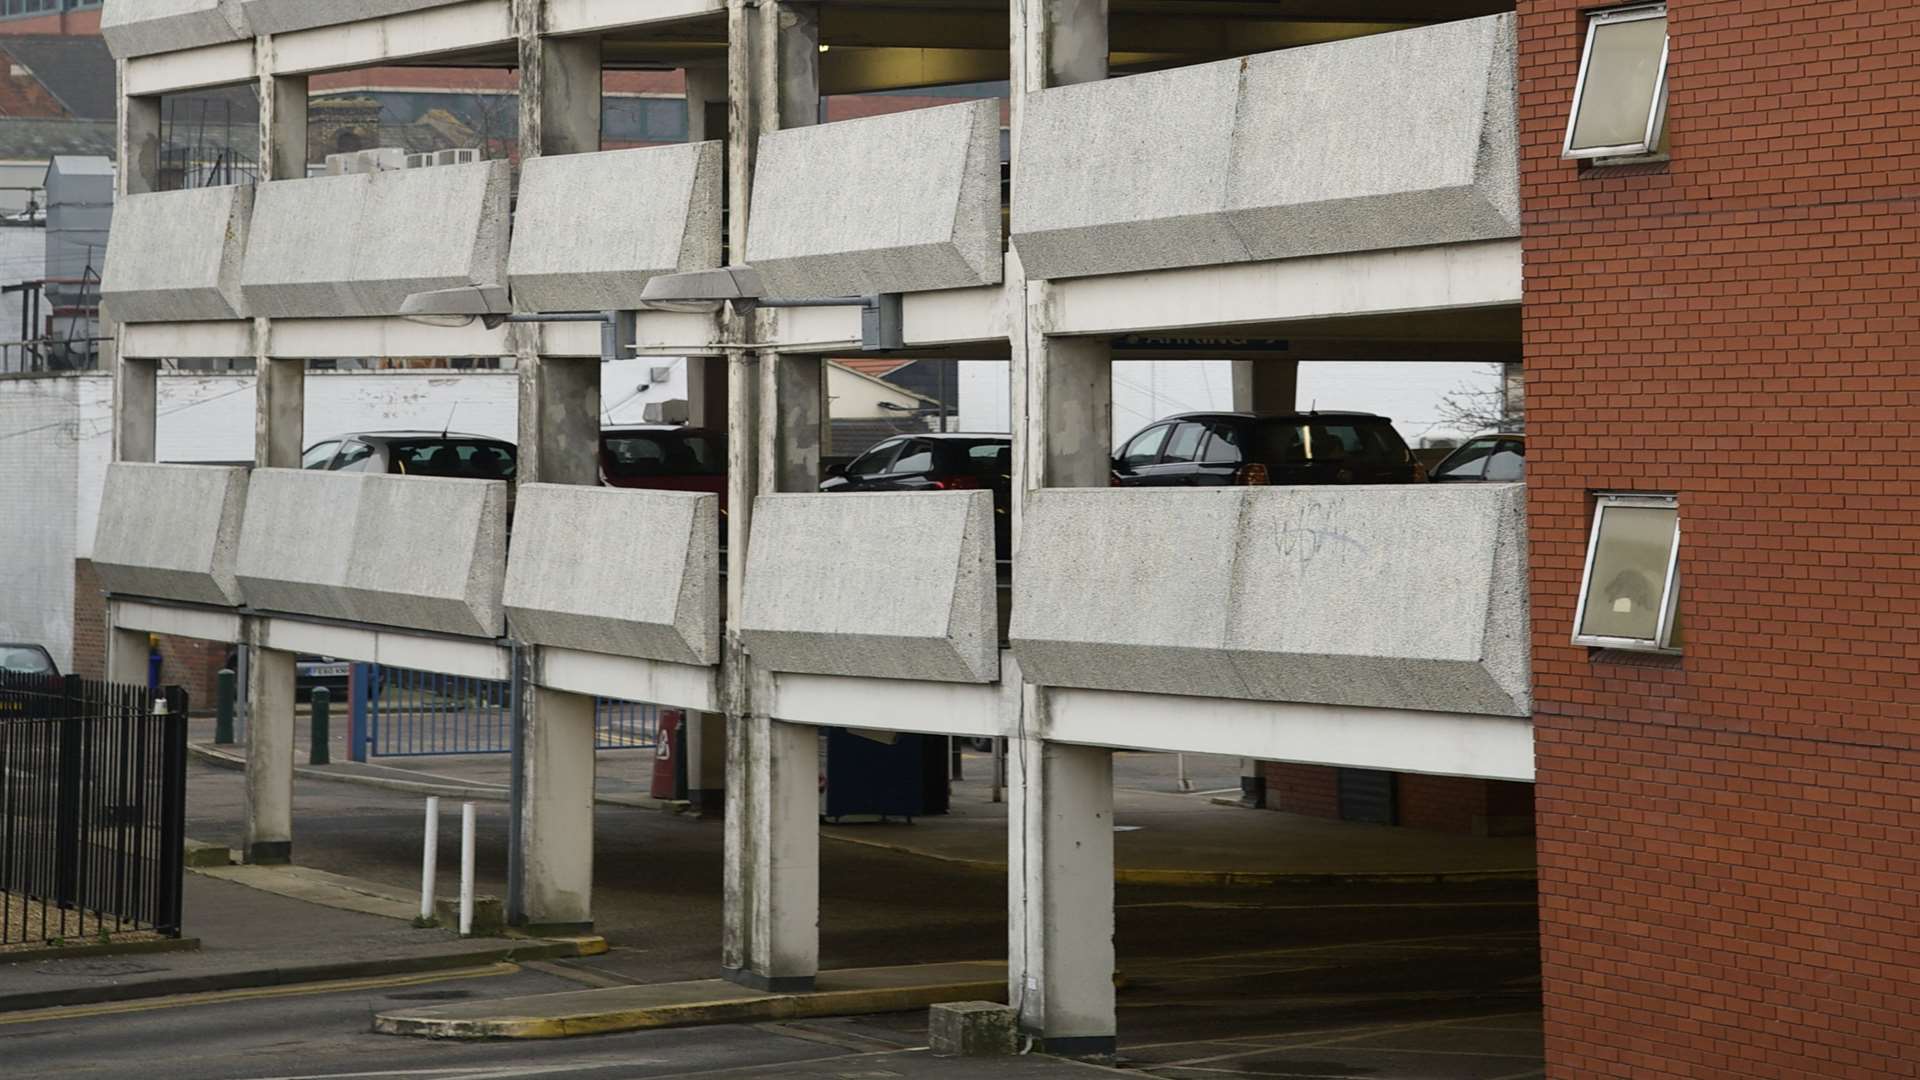 The Brook car park in Chatham